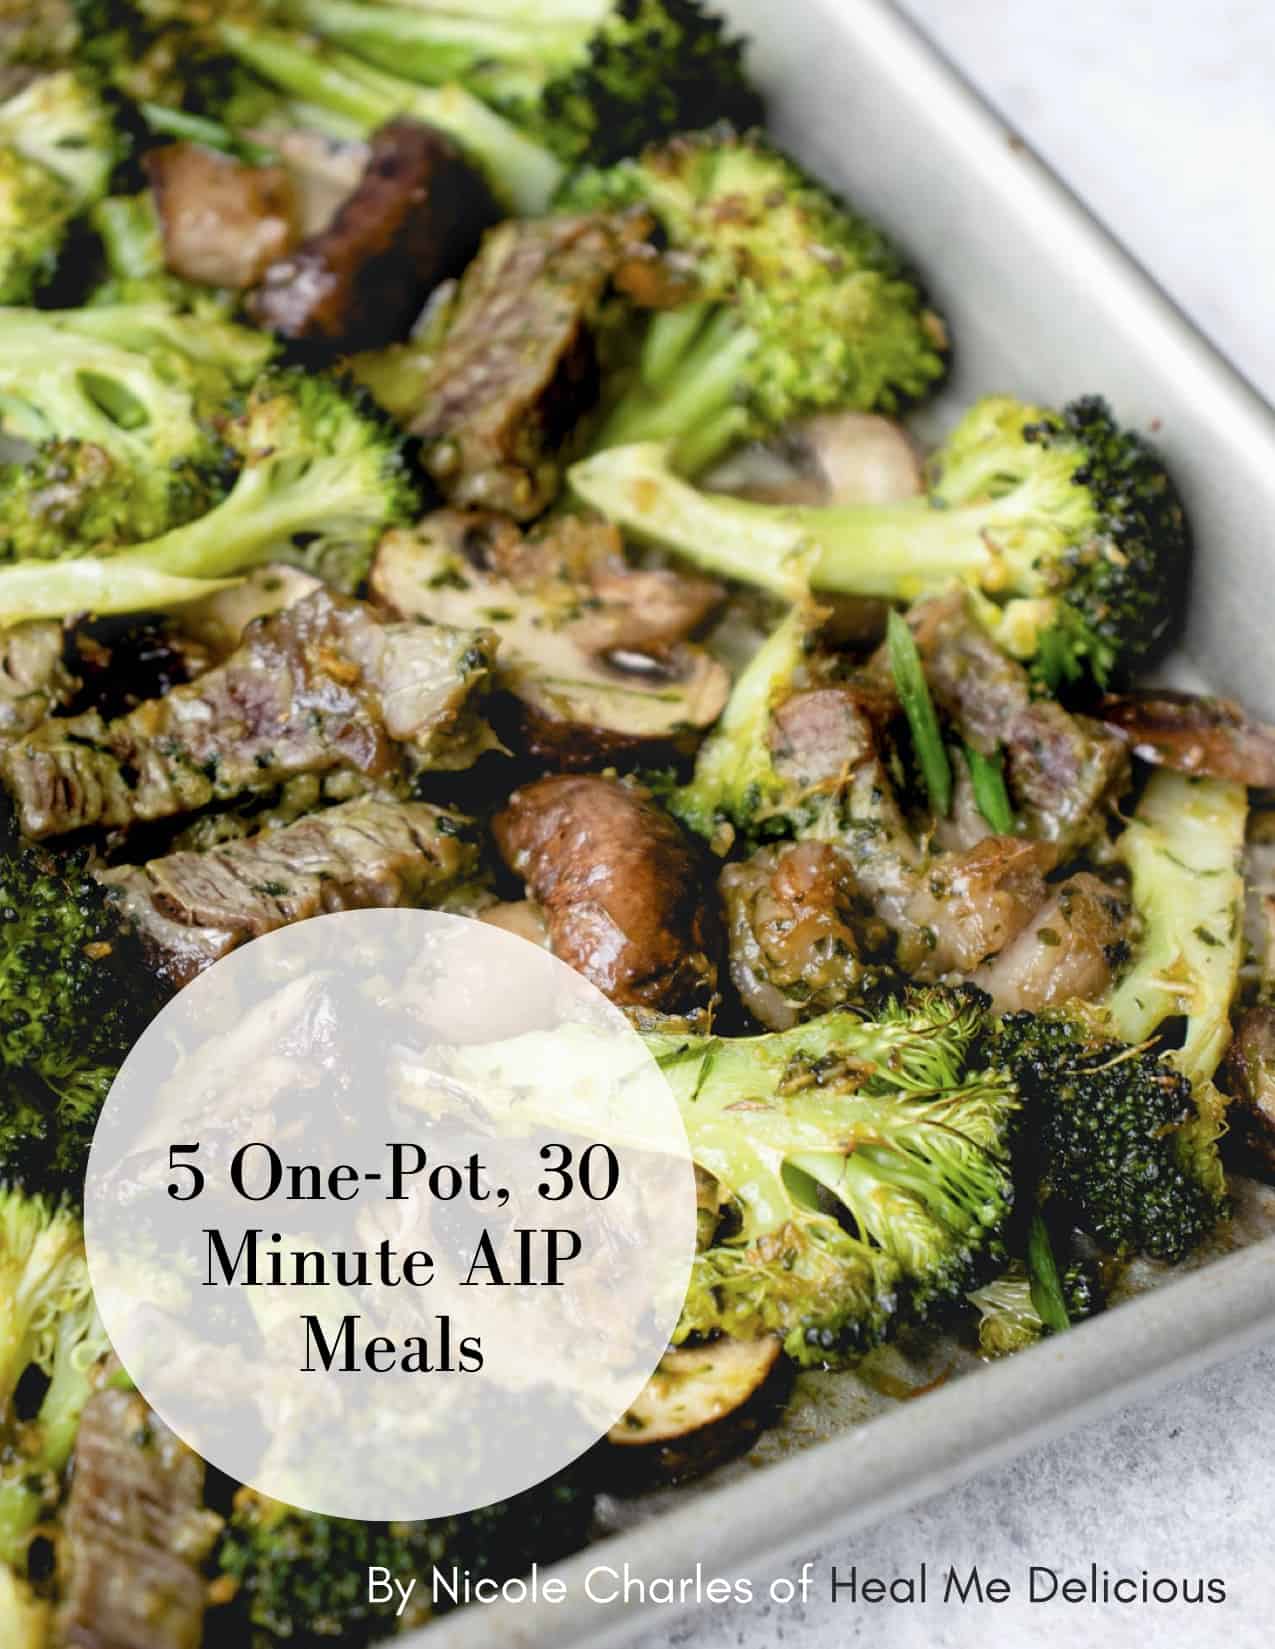 beef, broccoli and mushrooms on a stainless steel sheet pan